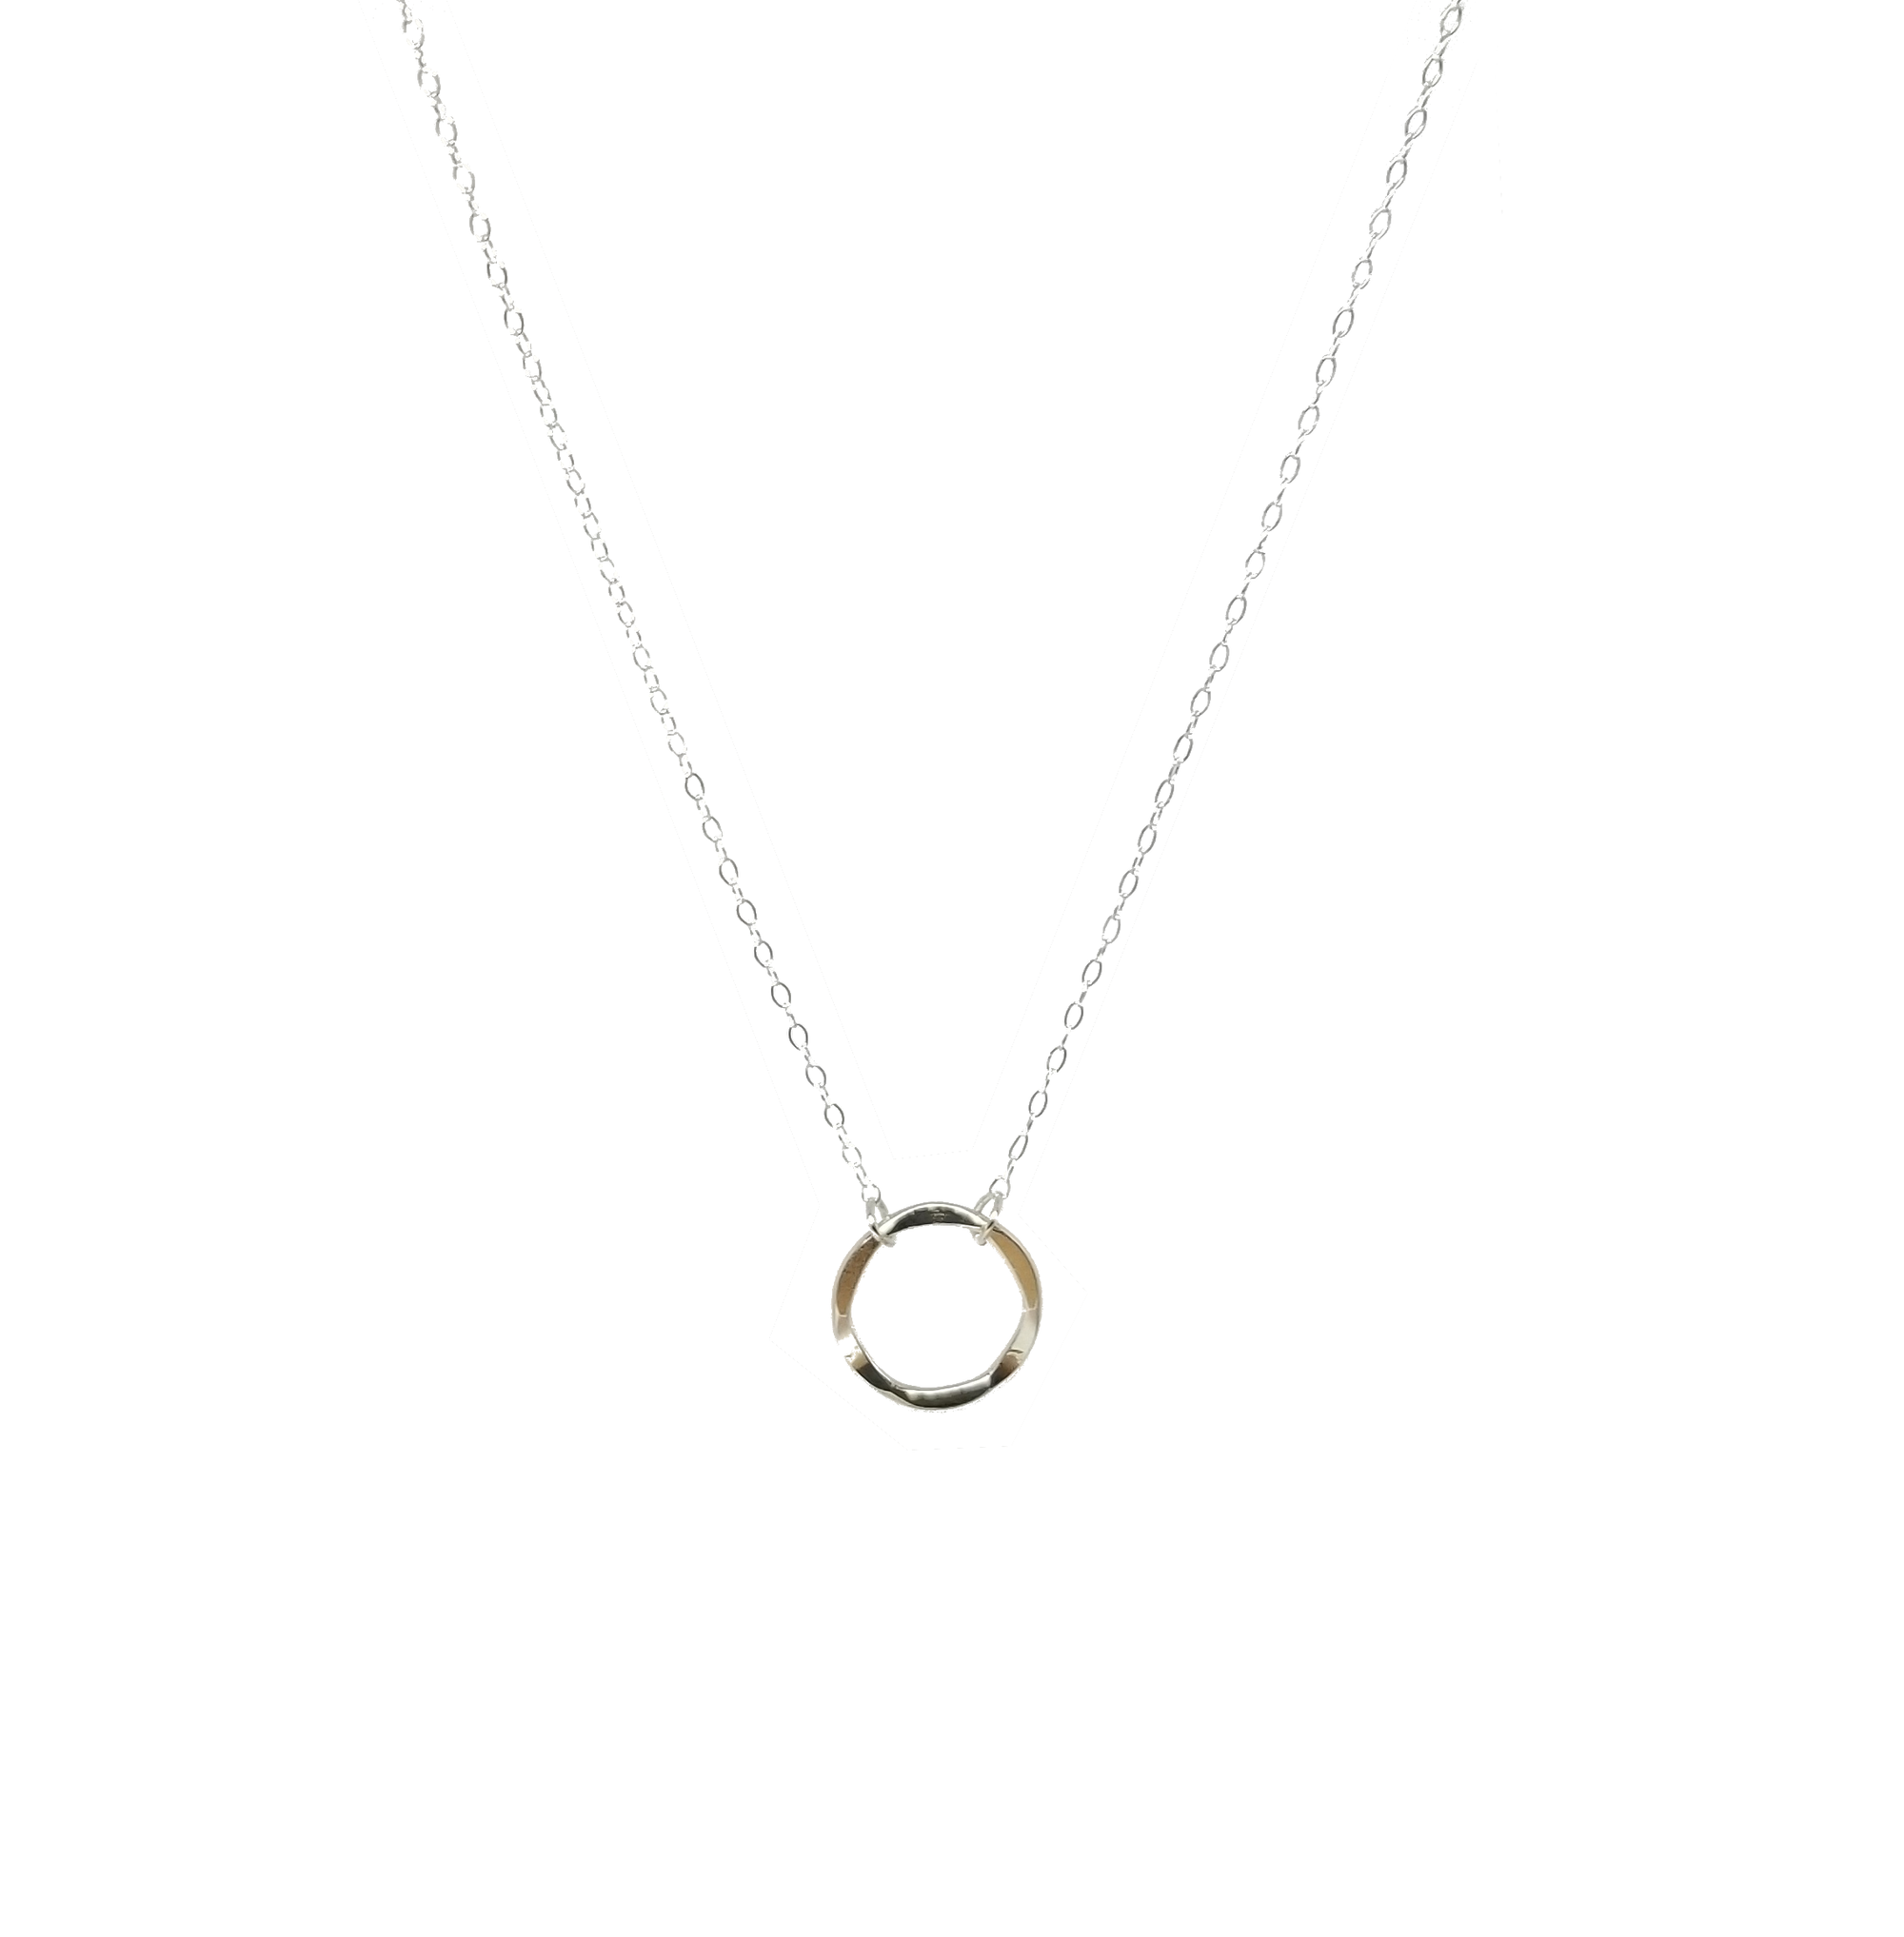 Gold circle short necklace by kind karma